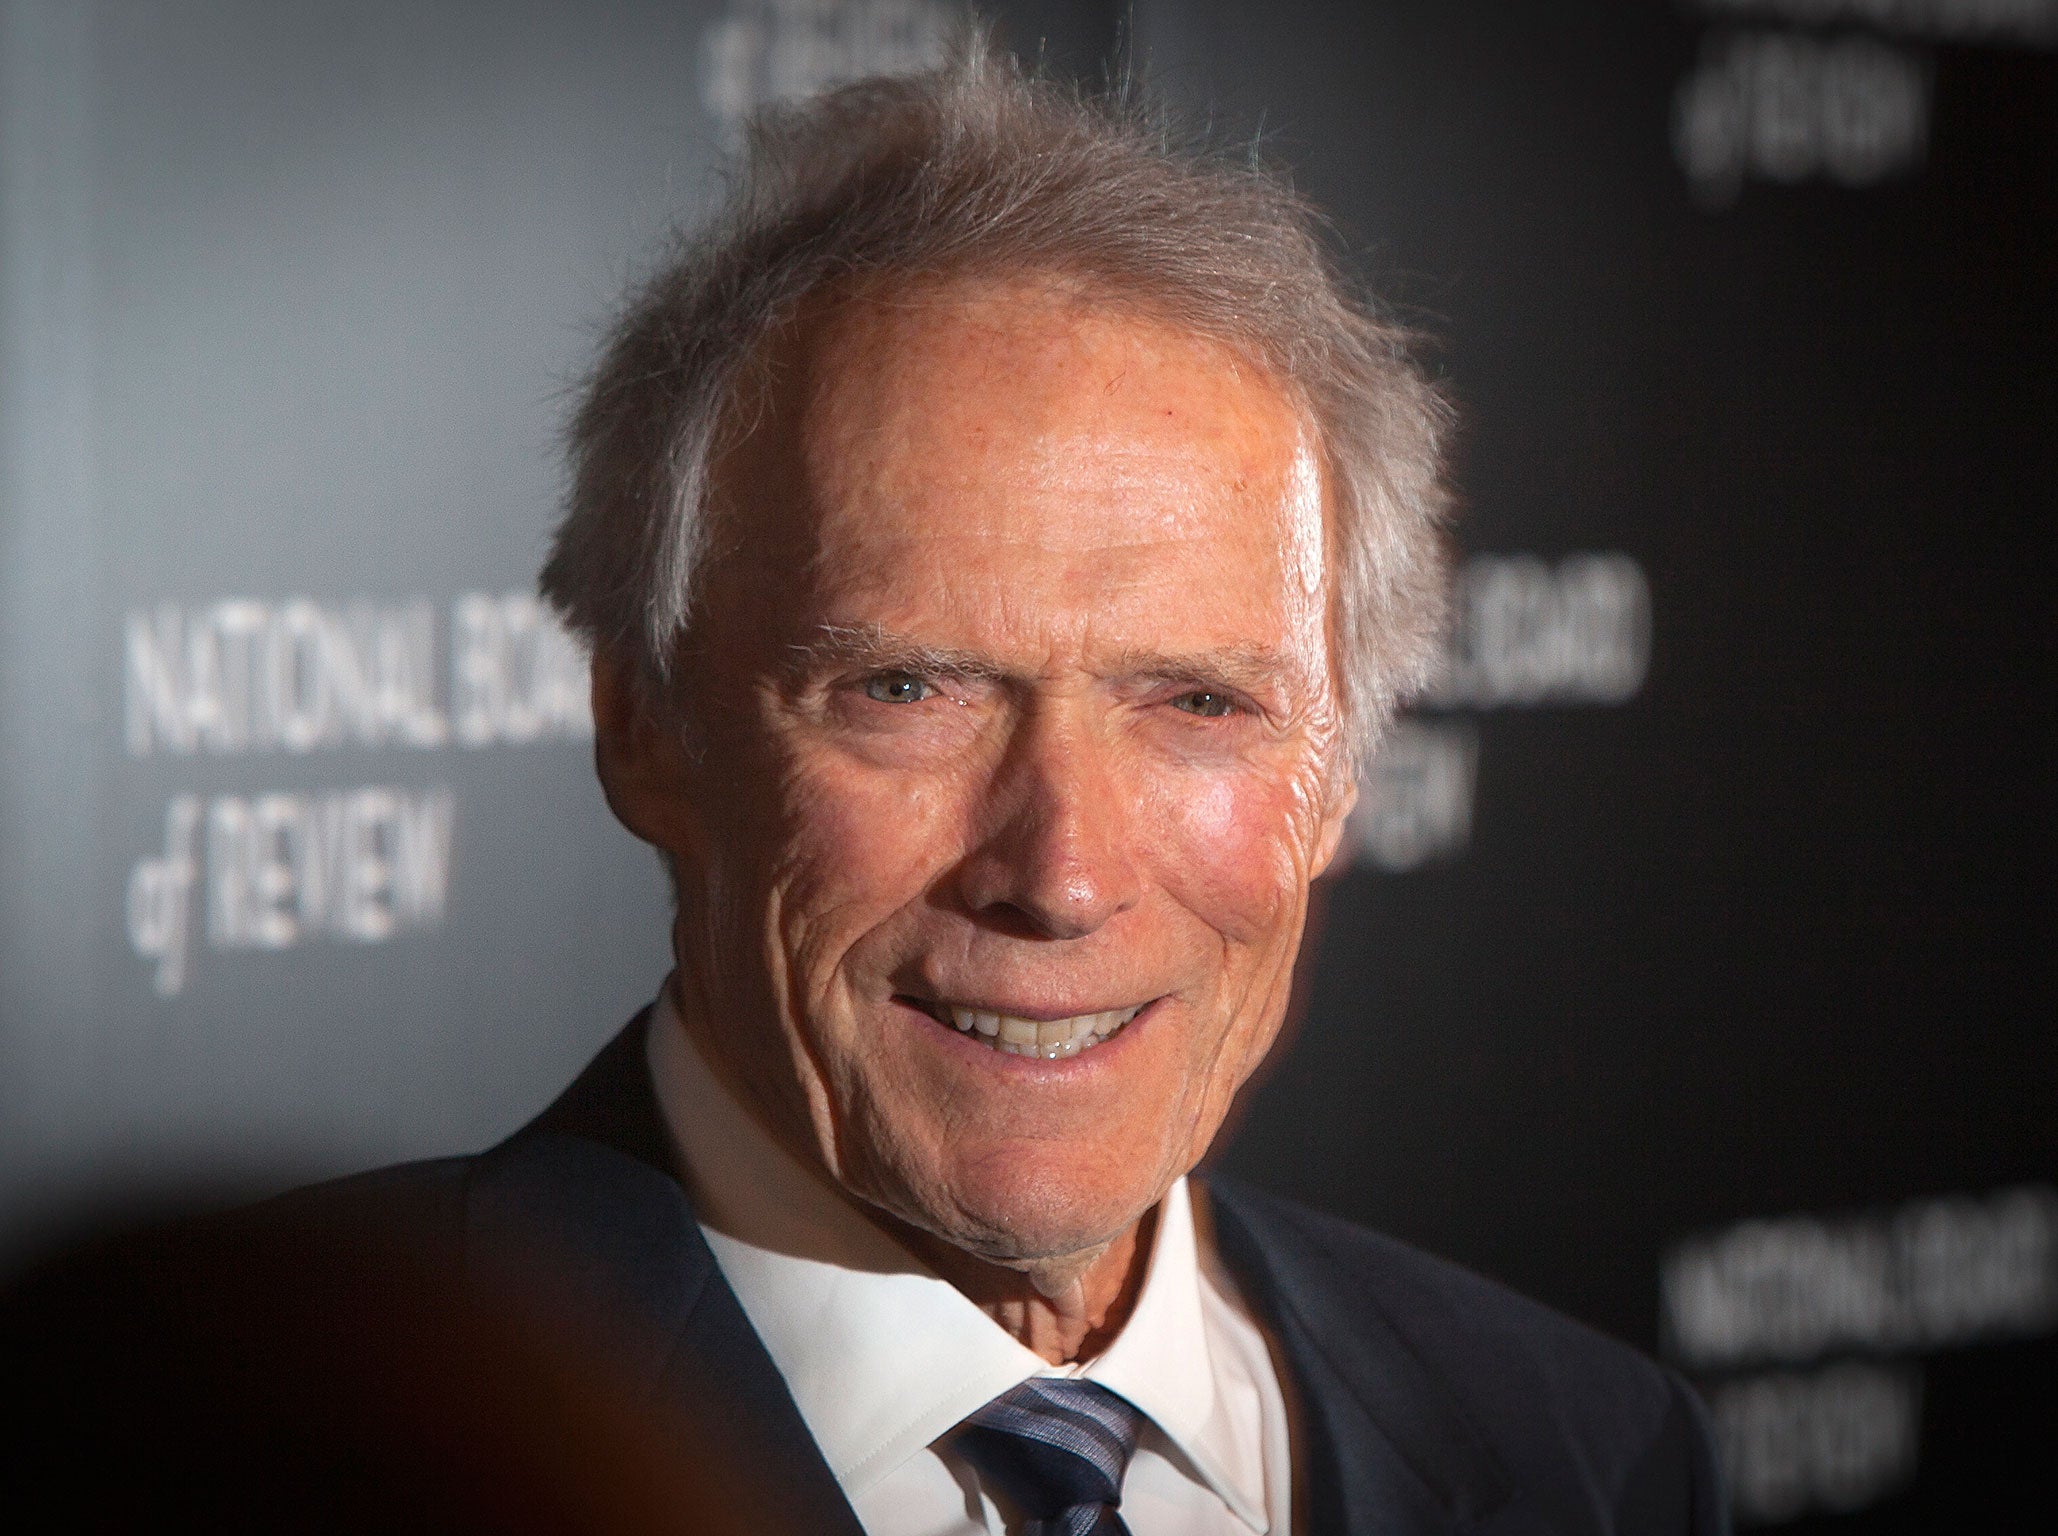 Romney is unlikely to have any celebrity backing from the likes of Clint Eastwood.